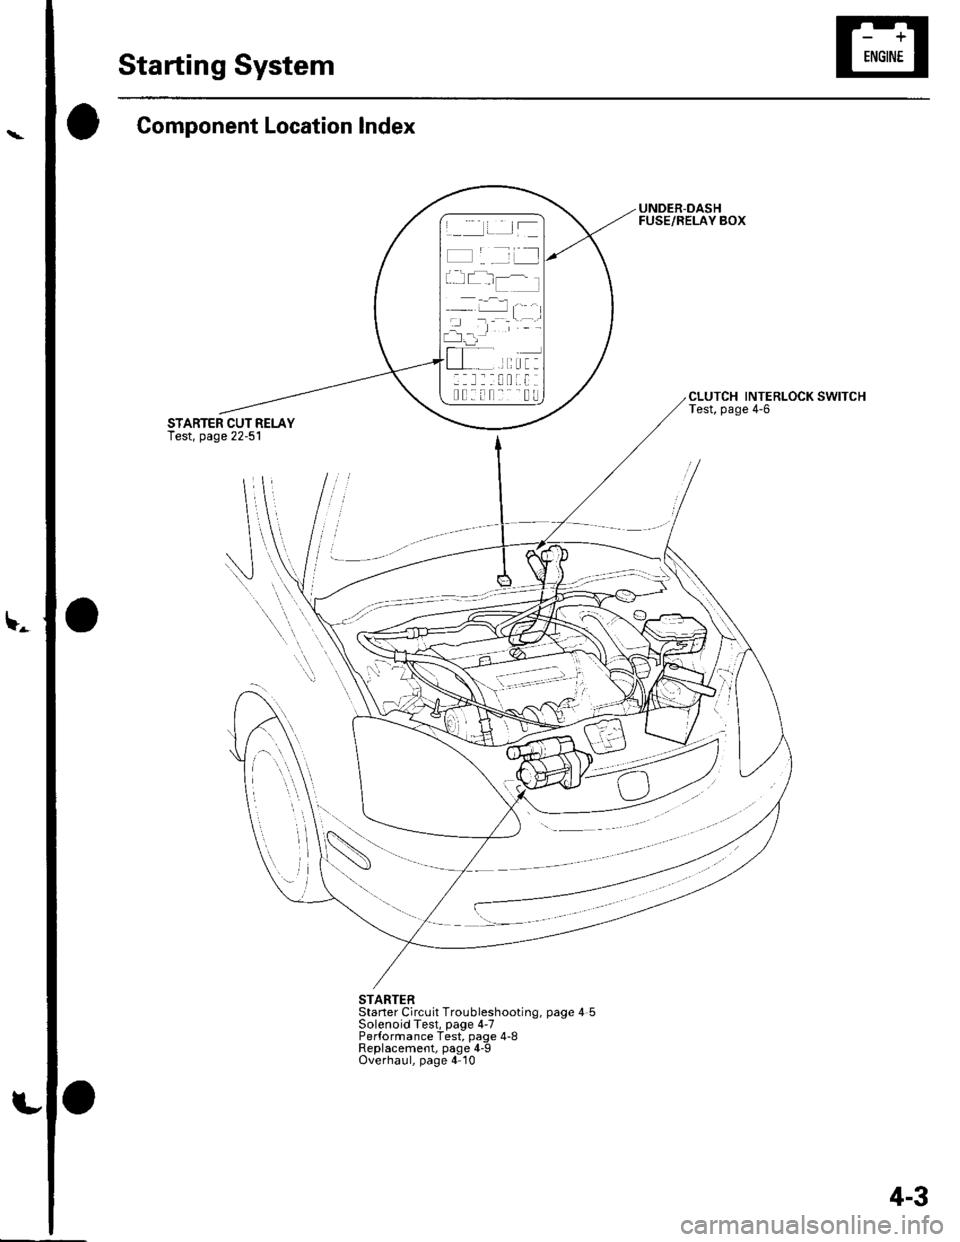 HONDA CIVIC 2003 7.G Owners Guide \-
Starting System
Component Location Index
UNDER-DASHFUSE/RELAY BOX
CLUTCH INTERLOCK SWITCHTest, page 4-6
STARTERStaner Circuit Troubleshoot,ng, page 4 5Solenoid Test, page 4-7Performance Test, page 